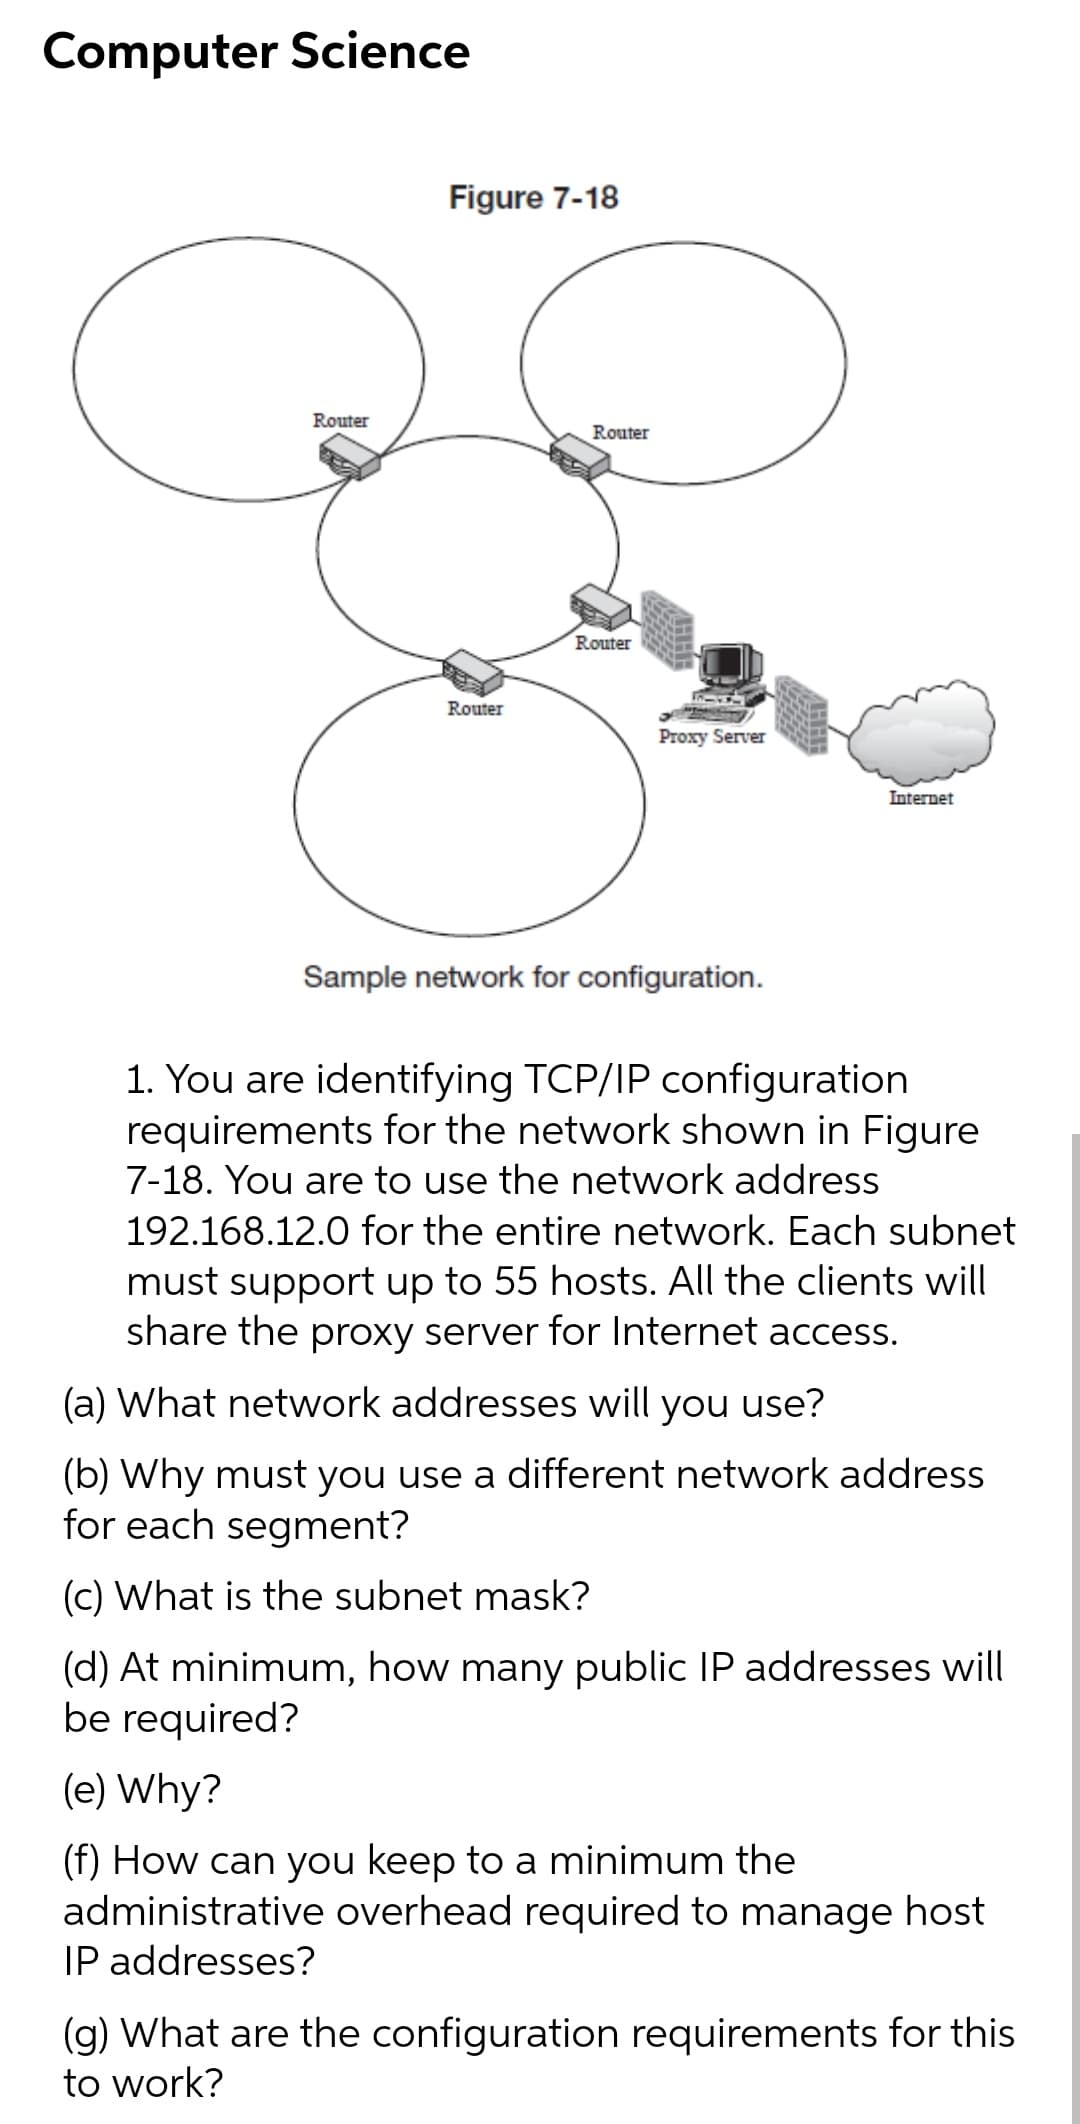 Computer Science
Figure 7-18
Router
Router
Router
Router
Proxy Server
Internet
Sample network for configuration.
1. You are identifying TCP/IP configuration
requirements for the network shown in Figure
7-18. You are to use the network address
192.168.12.0 for the entire network. Each subnet
must support up to 55 hosts. All the clients will
share the proxy server for Internet access.
(a) What network addresses will you use?
(b) Why must you use a different network address
for each segment?
(c) What is the subnet mask?
(d) At minimum, how many public IP addresses will
be required?
(e) Why?
(f) How can you keep to a minimum the
administrative overhead required to manage host
IP addresses?
(g) What are the configuration requirements for this
to work?
